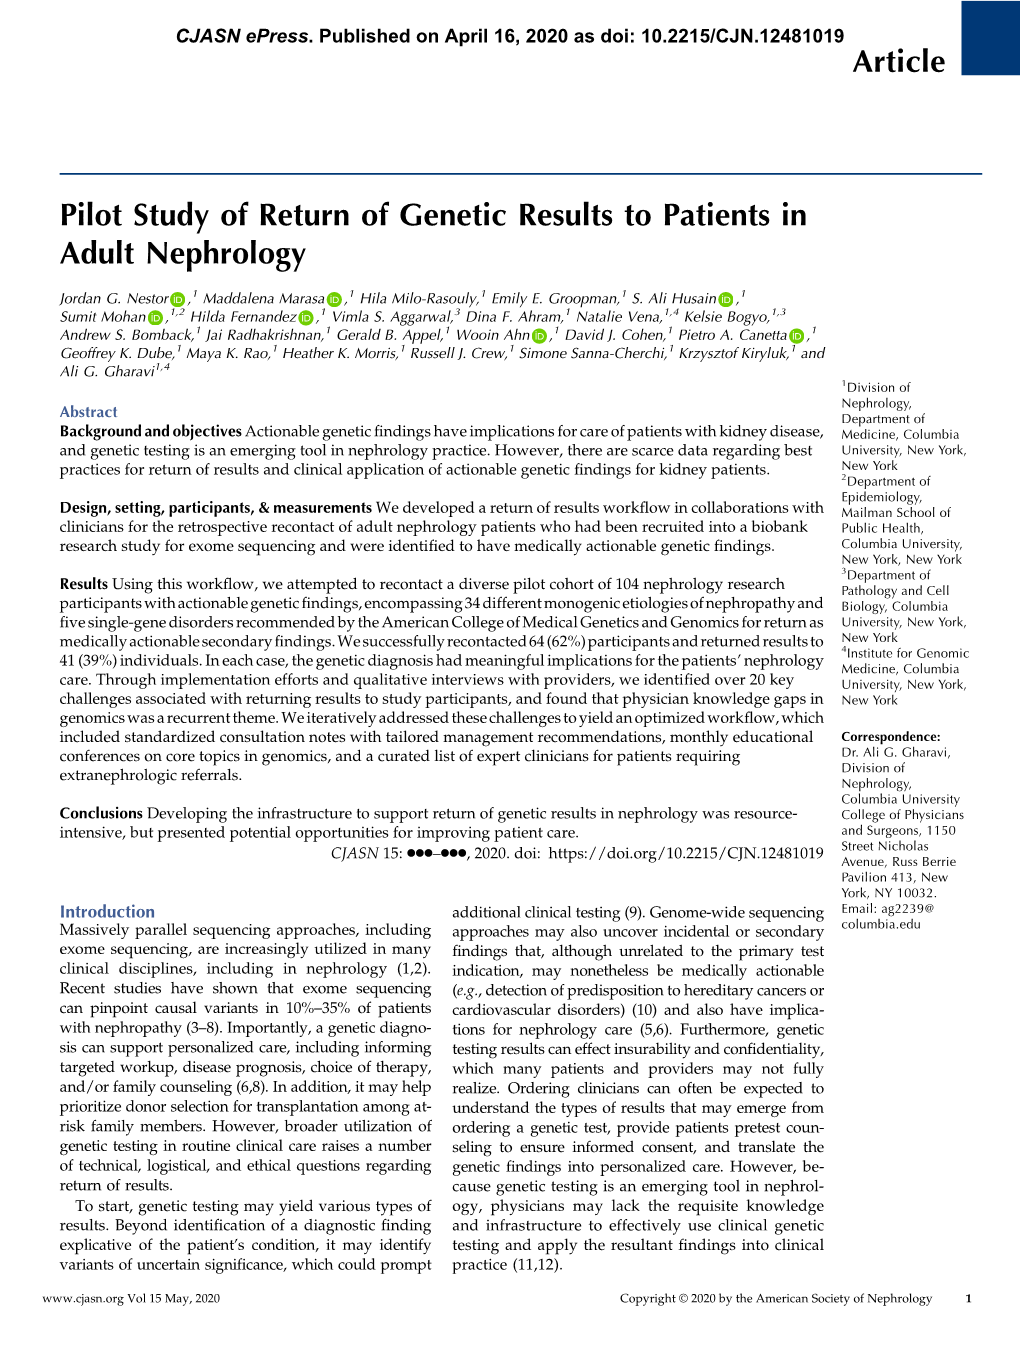 Article Pilot Study of Return of Genetic Results to Patients in Adult